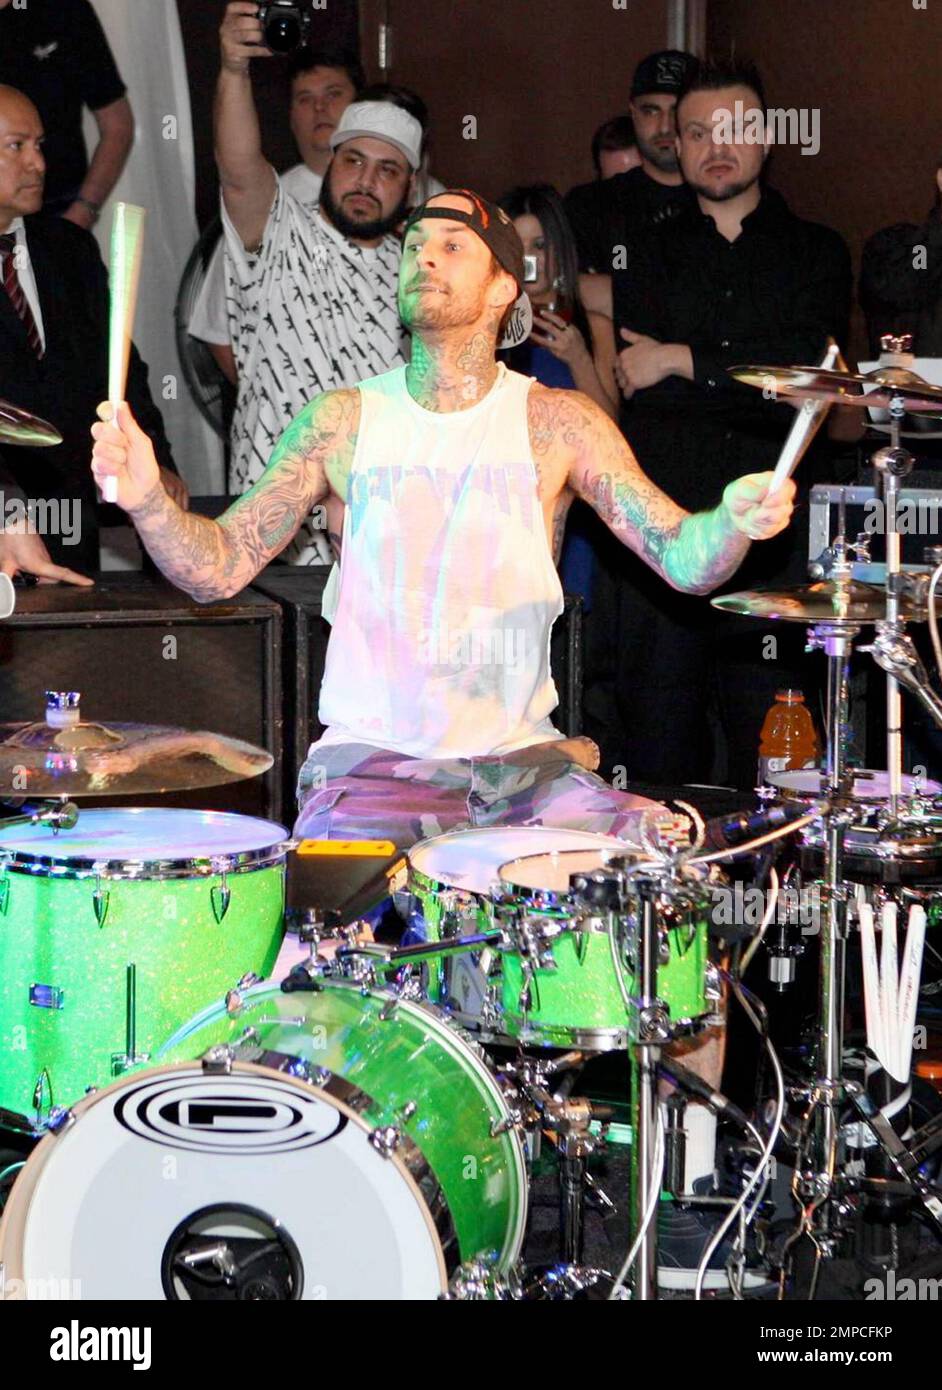 Travis Barker and DJ A-Trak kick off their first tour together with a special performance at PURE nightclub inside Caesar's Palace. DJ A-Trak took the place of DJ AM, who died from a reported accidental drug overdose last year. Barker has a DJ AM sticker on his drumset in memory of his good friend. Las Vegas, NV. 3/12/10.   . Stock Photo